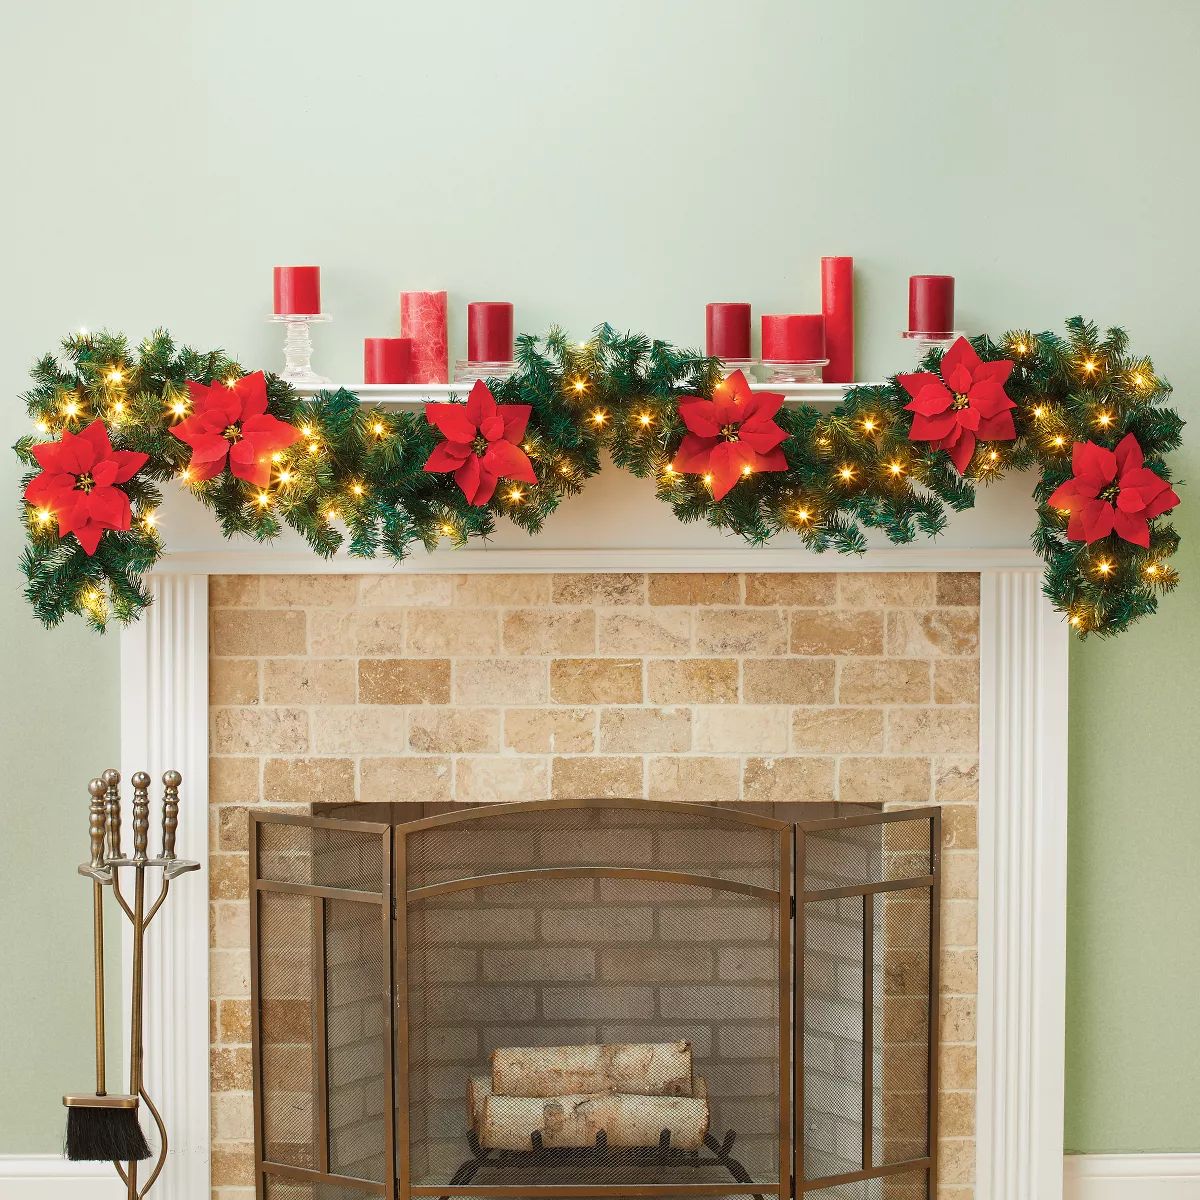 Collections Etc 9-Foot LED Lighted Festive Poinsettia Garland | Target